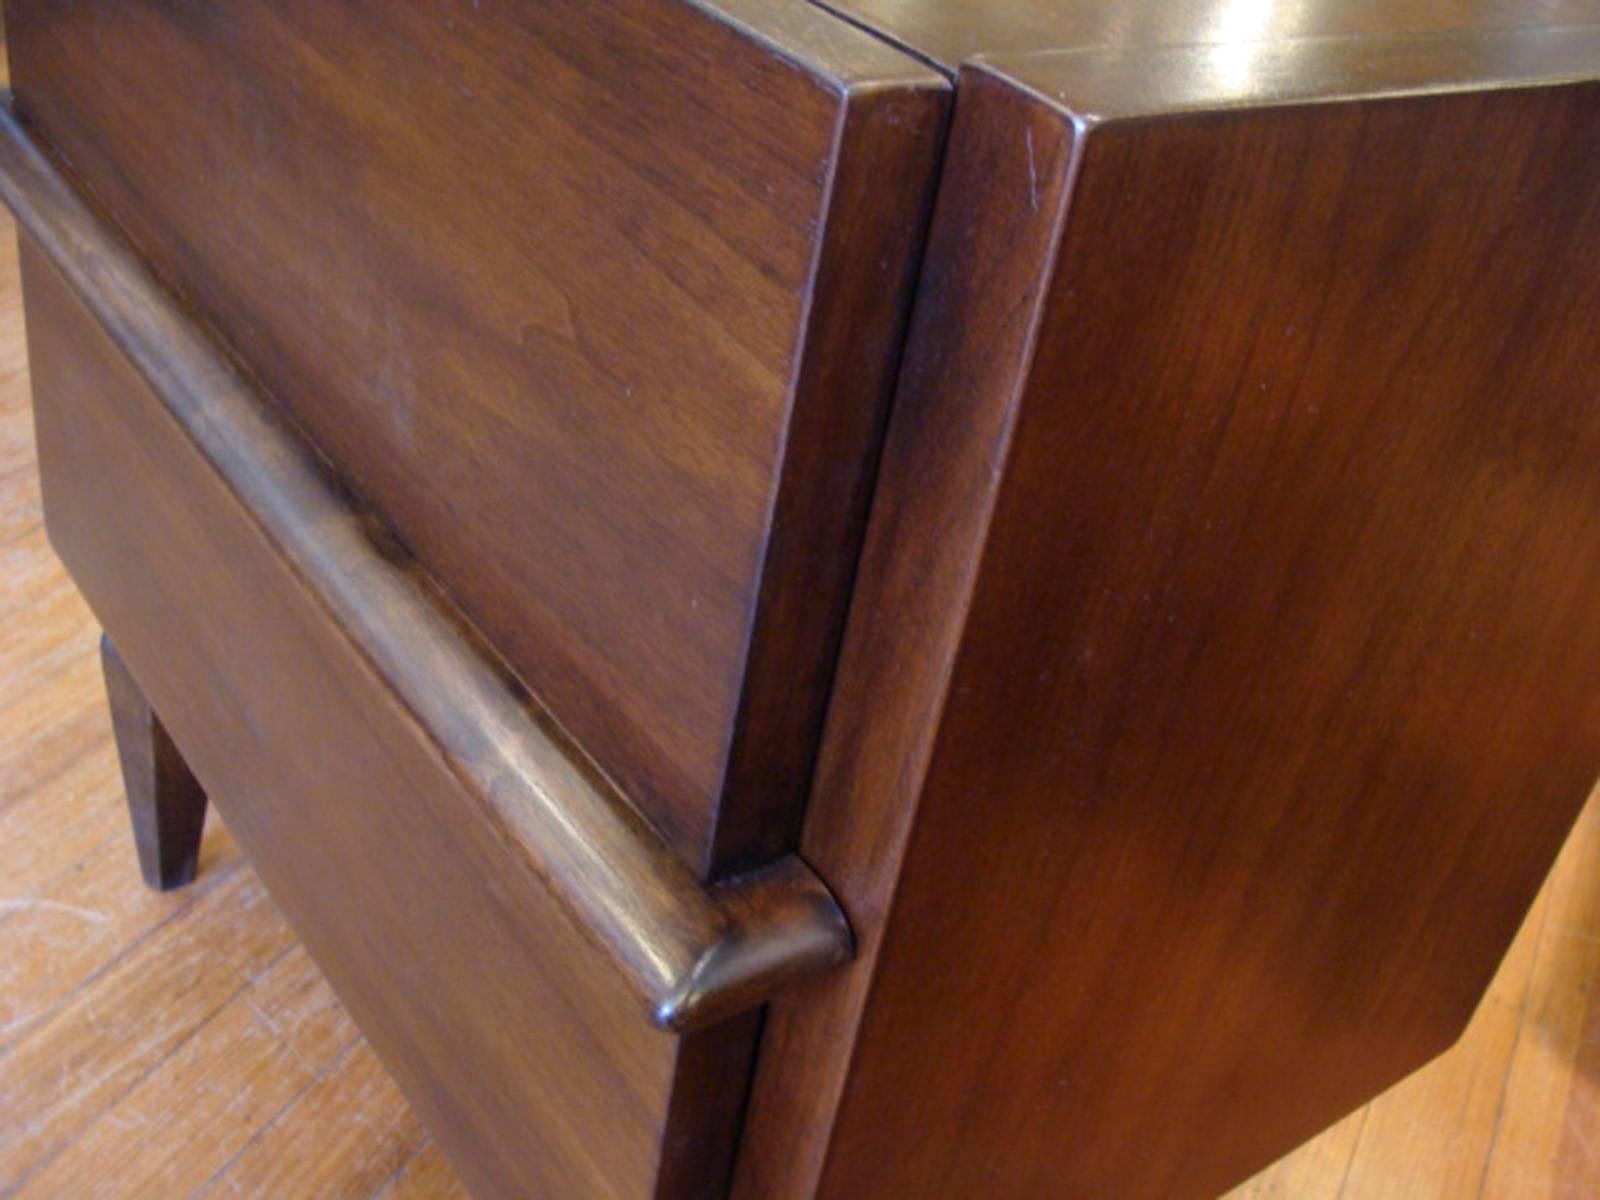 Pair of nightstands or end tables in walnut. Finish restored.

See separate listing for matching five-drawer dresser.